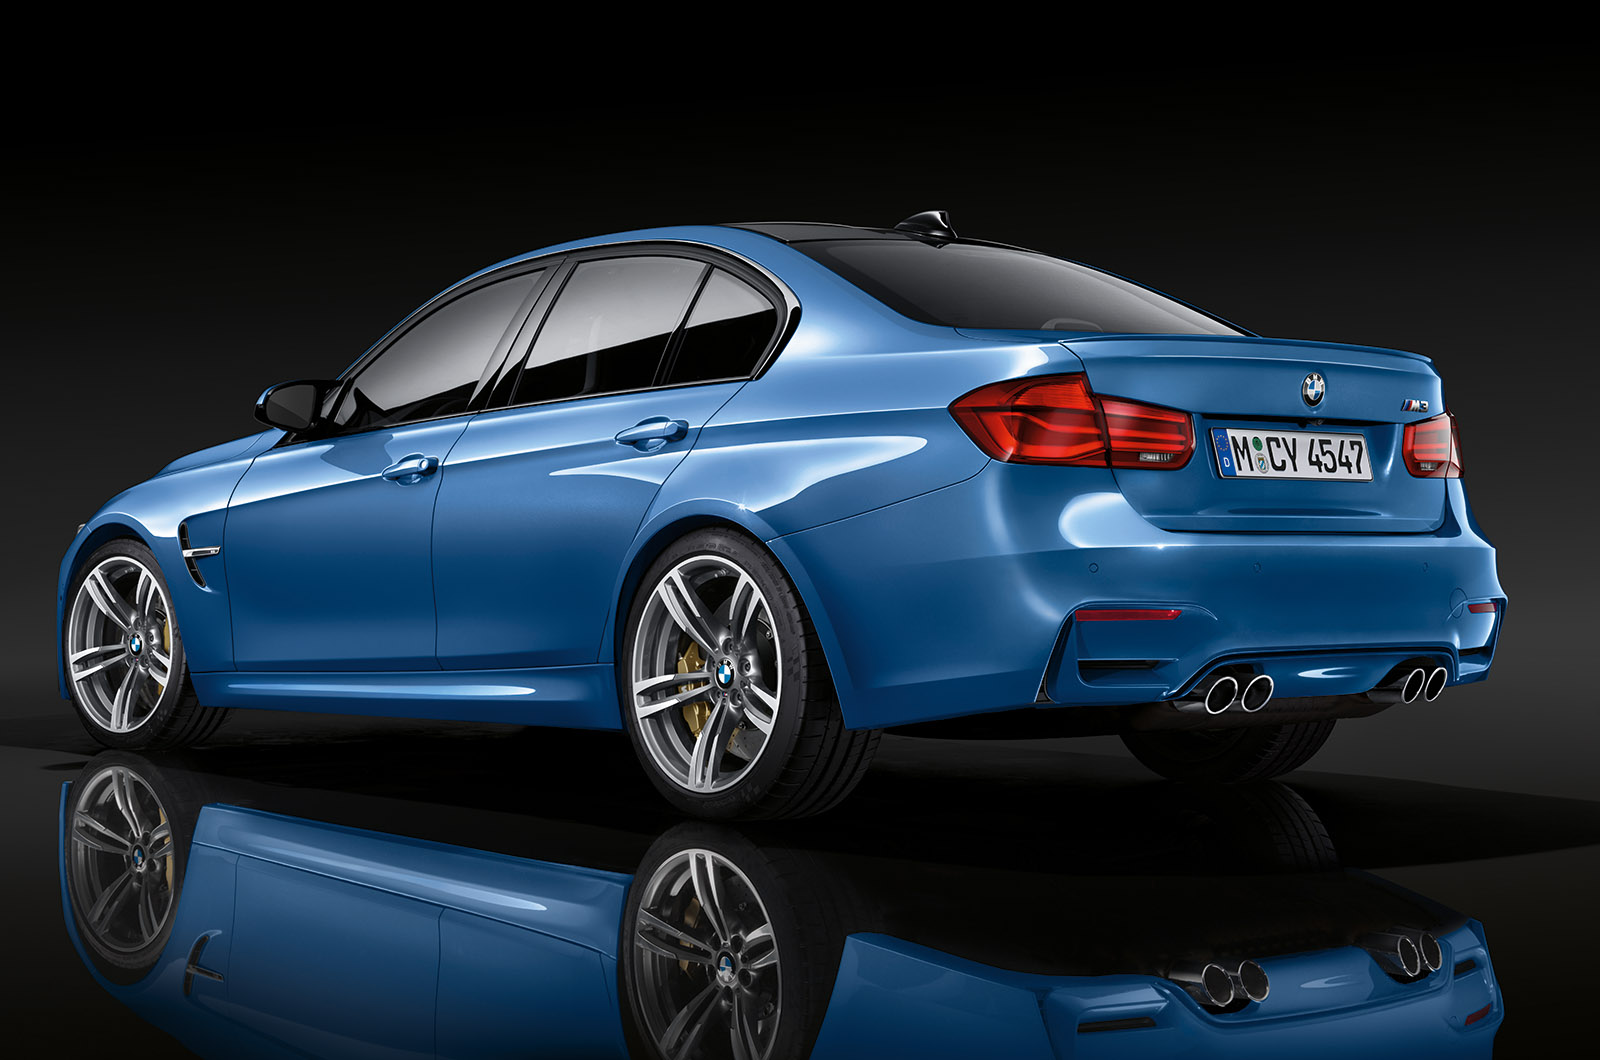 2015 BMW 3 Series facelift revealed - engines, pricing and studio